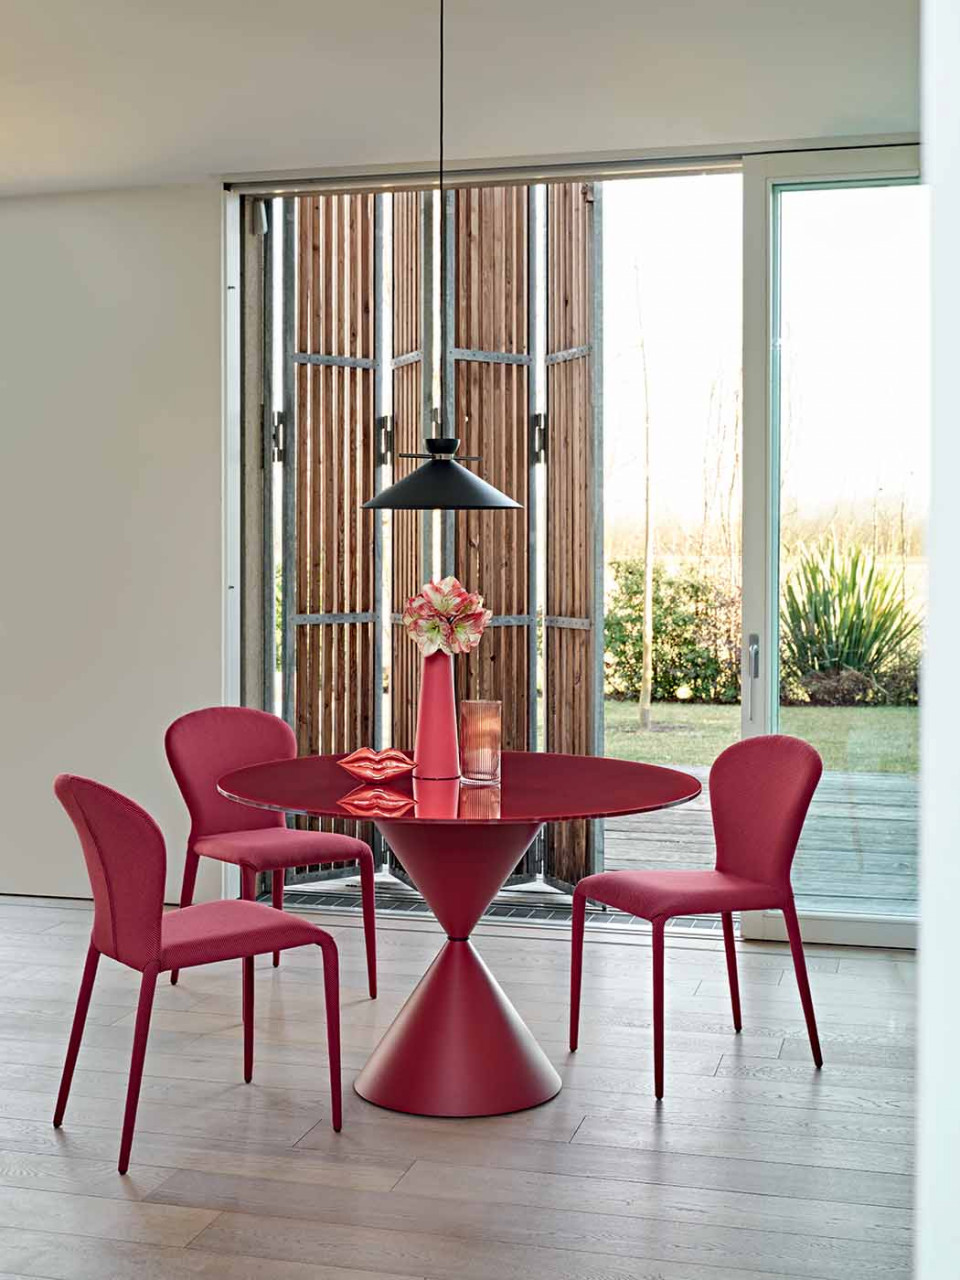 Soffio chair in red